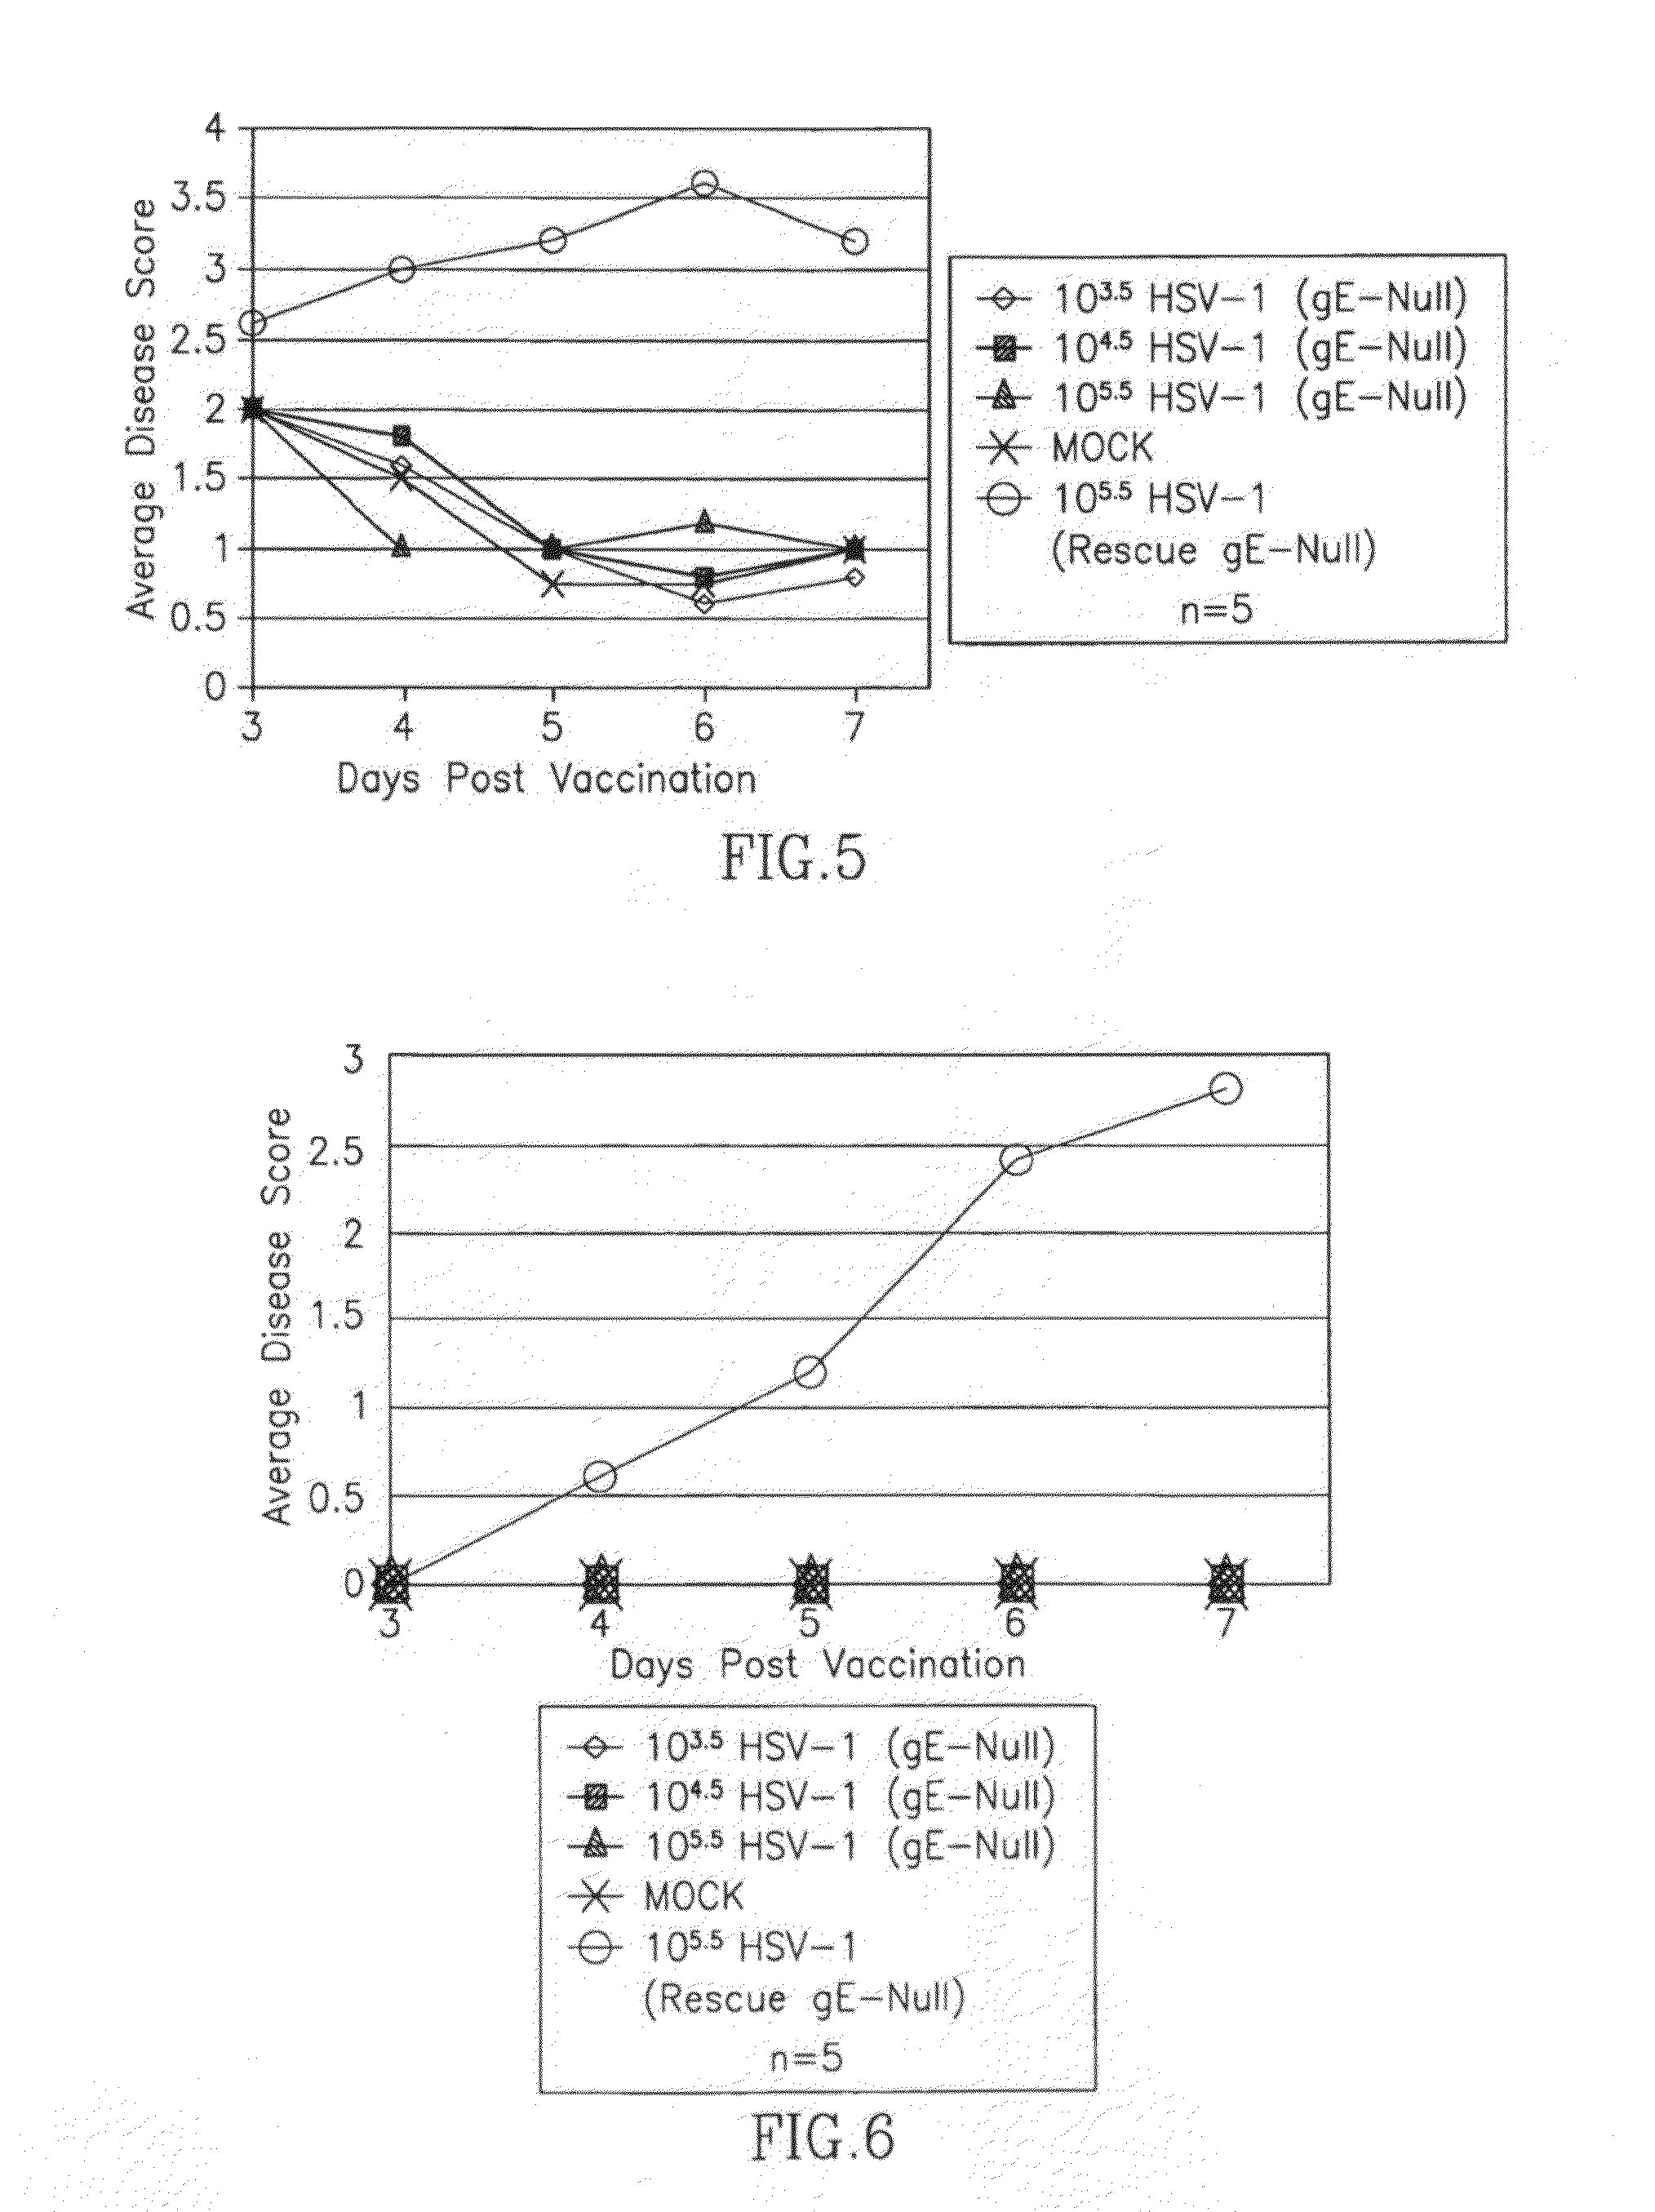 HSV-1 and HSV-2 vaccines and methods of use thereof